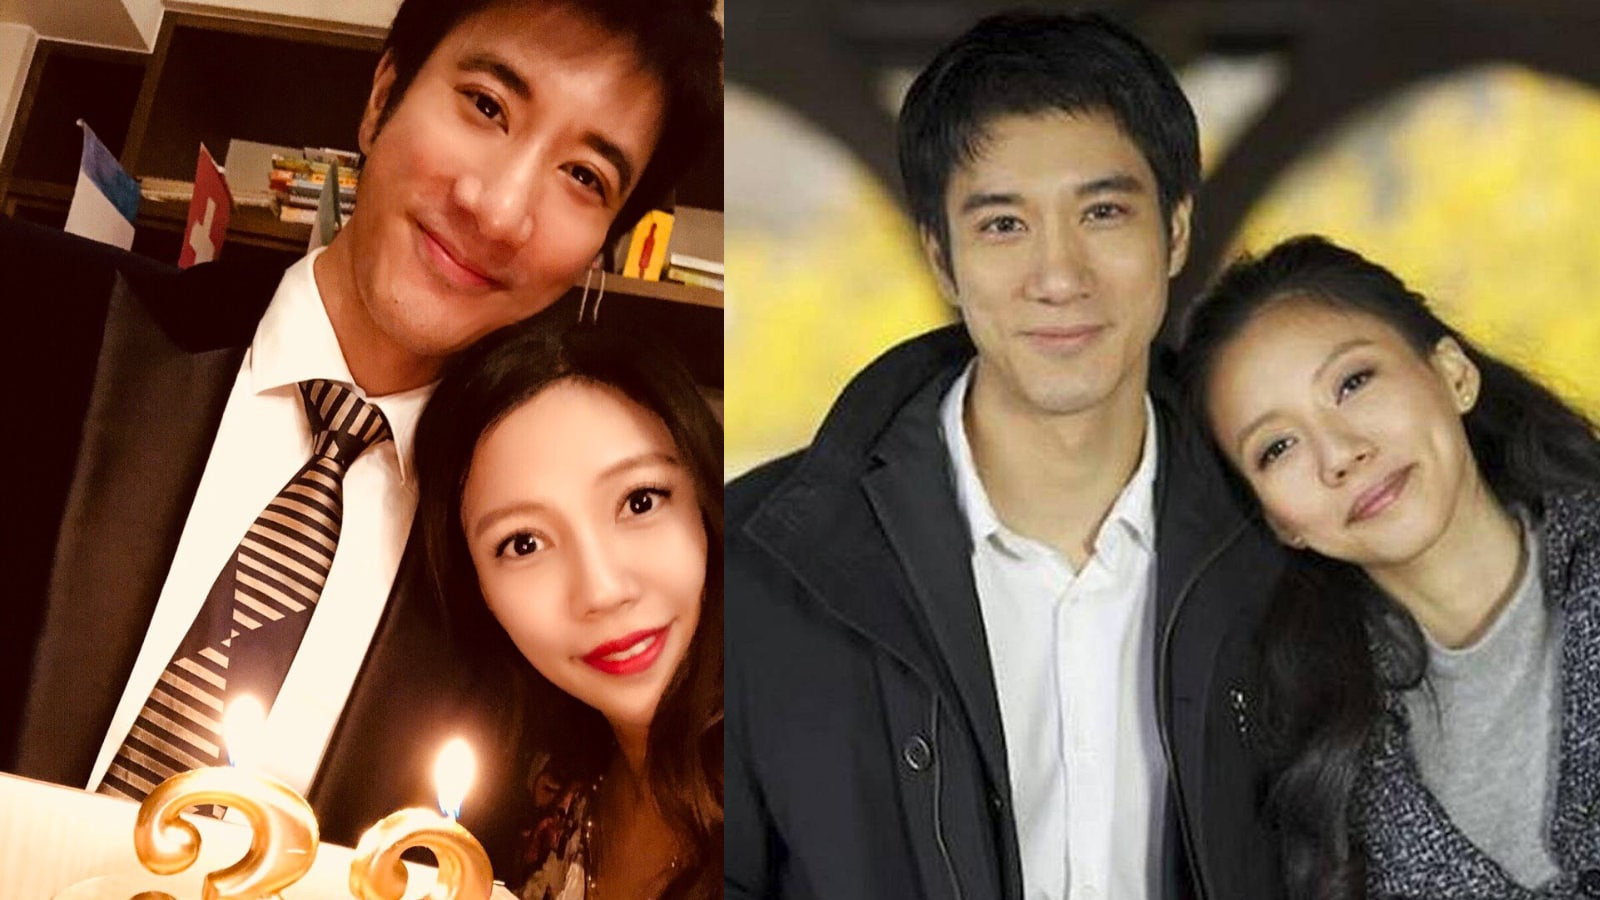 Wang Leehom's Wife Says The Singer Has Many Sex Partners And Hires  Prostitutes In Damning Weibo Post - 8days